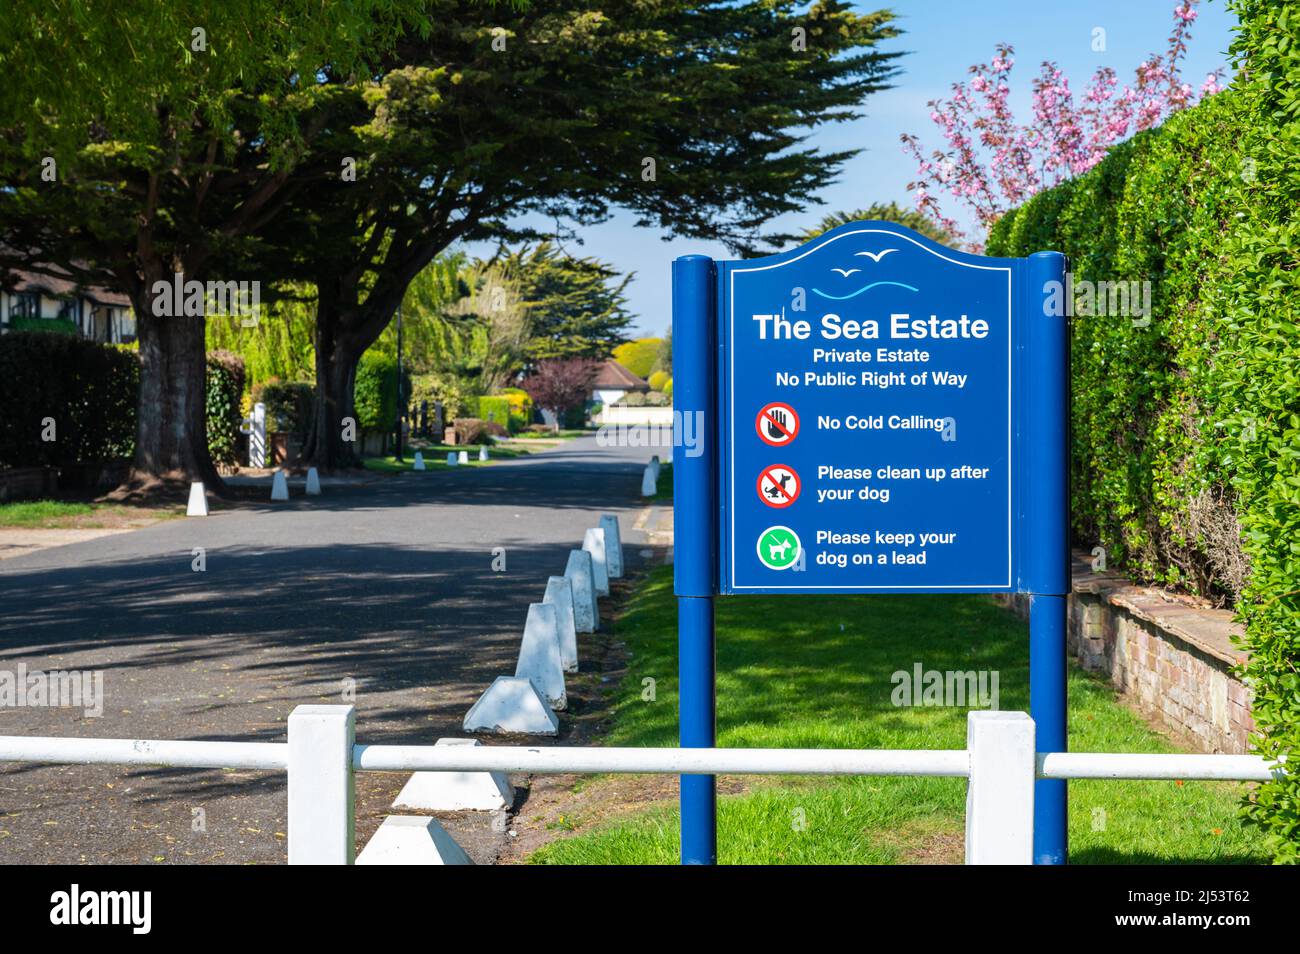 Sign and gate at entrance to The Sea Estate, a private estate with no public right of way in Rustington, West Sussex, England, UK. Stock Photo